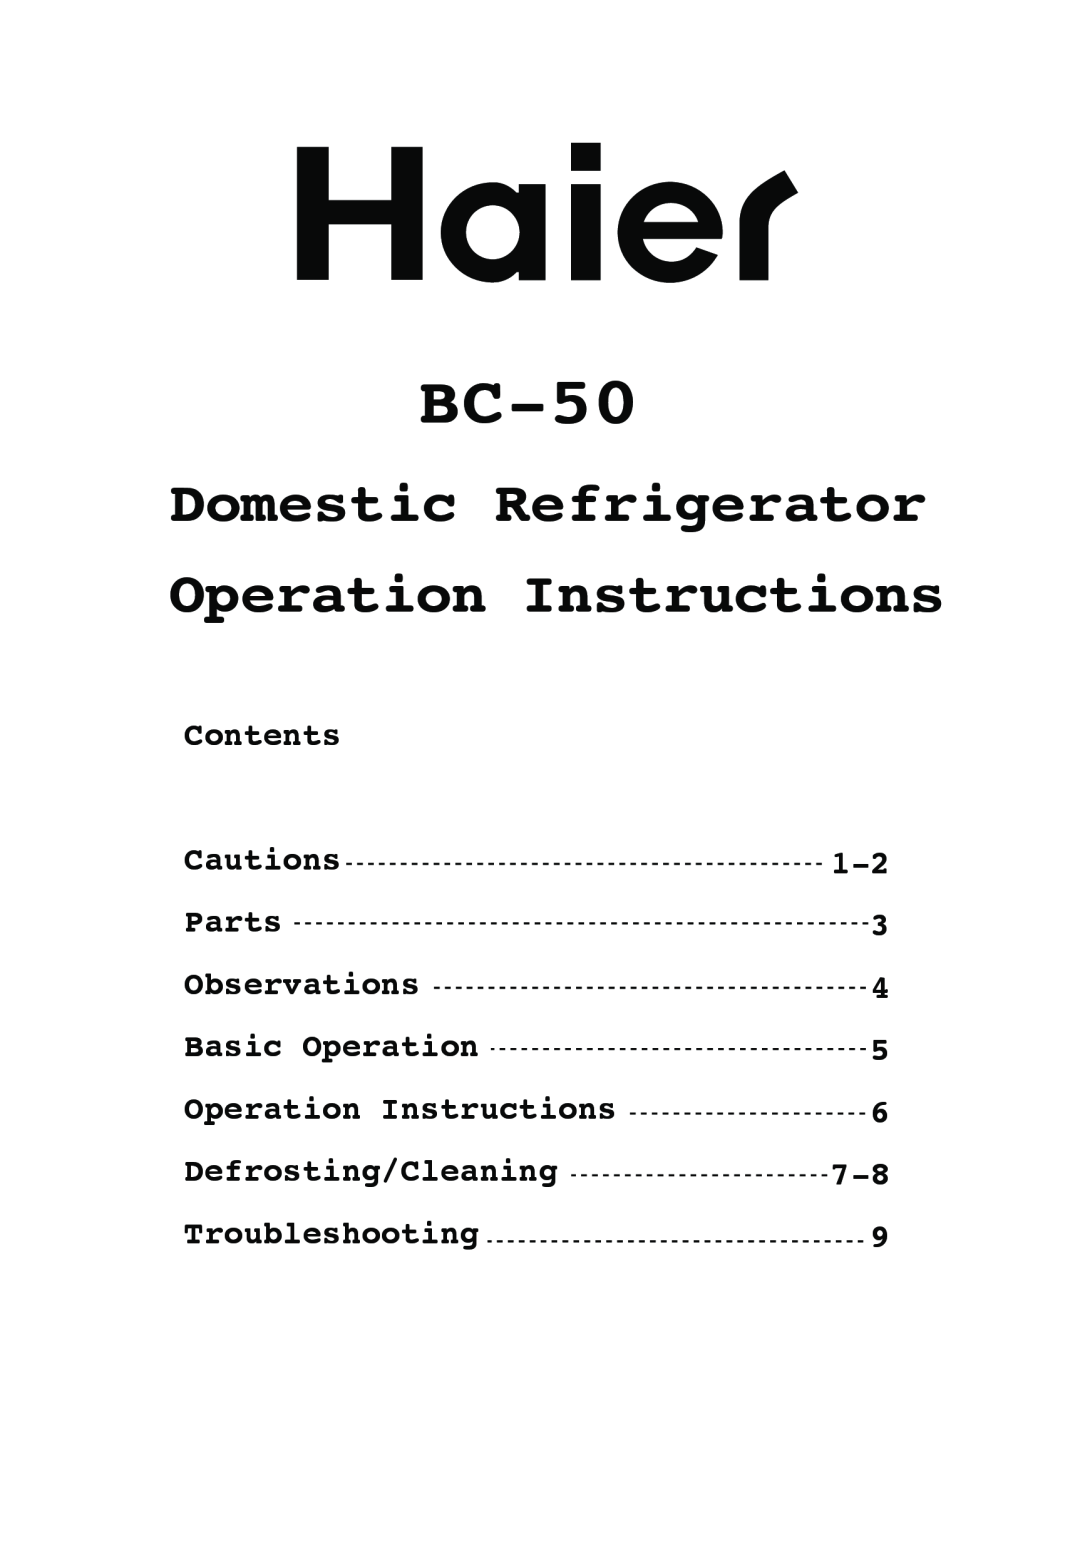 Haier BC-50 manual Domestic Refrigerator Operation Instructions, Contents Cautions Parts Observations, 1-2 3 4 5 6 7-8 9 